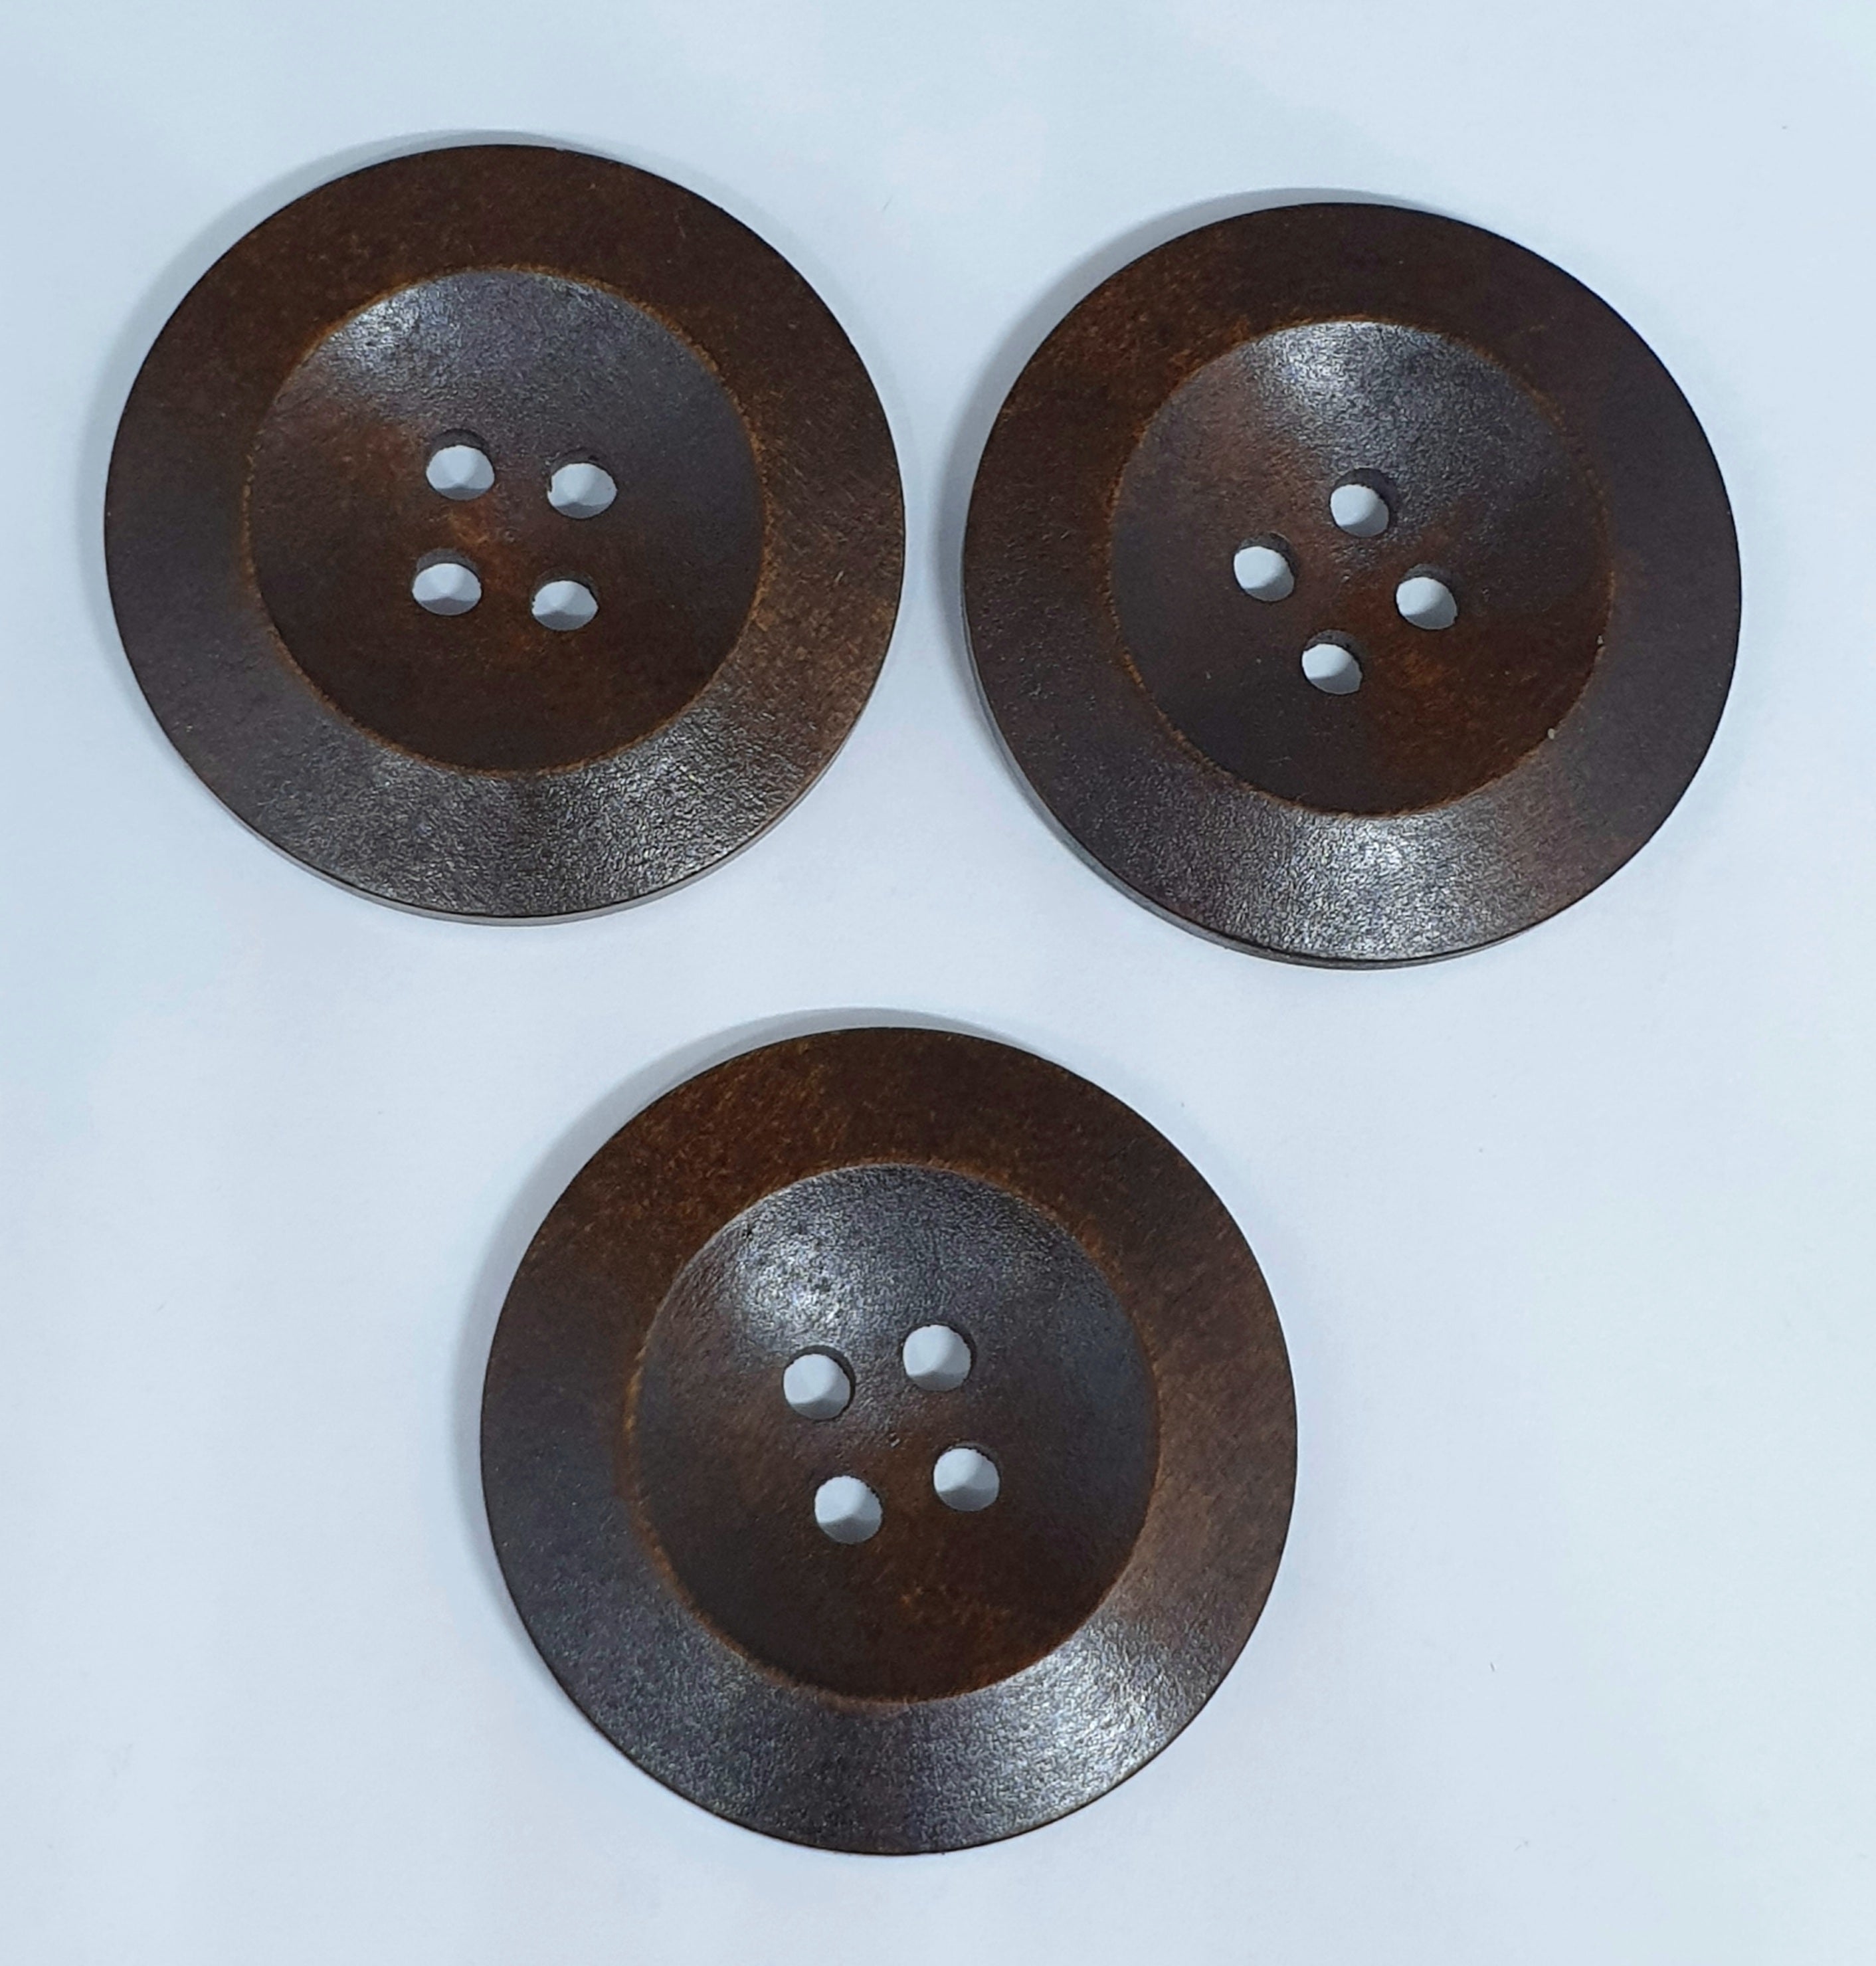 MajorCrafts 8pcs 38mm Classic Vintage Brown Round 4 Holes Large Wooden Sewing Buttons